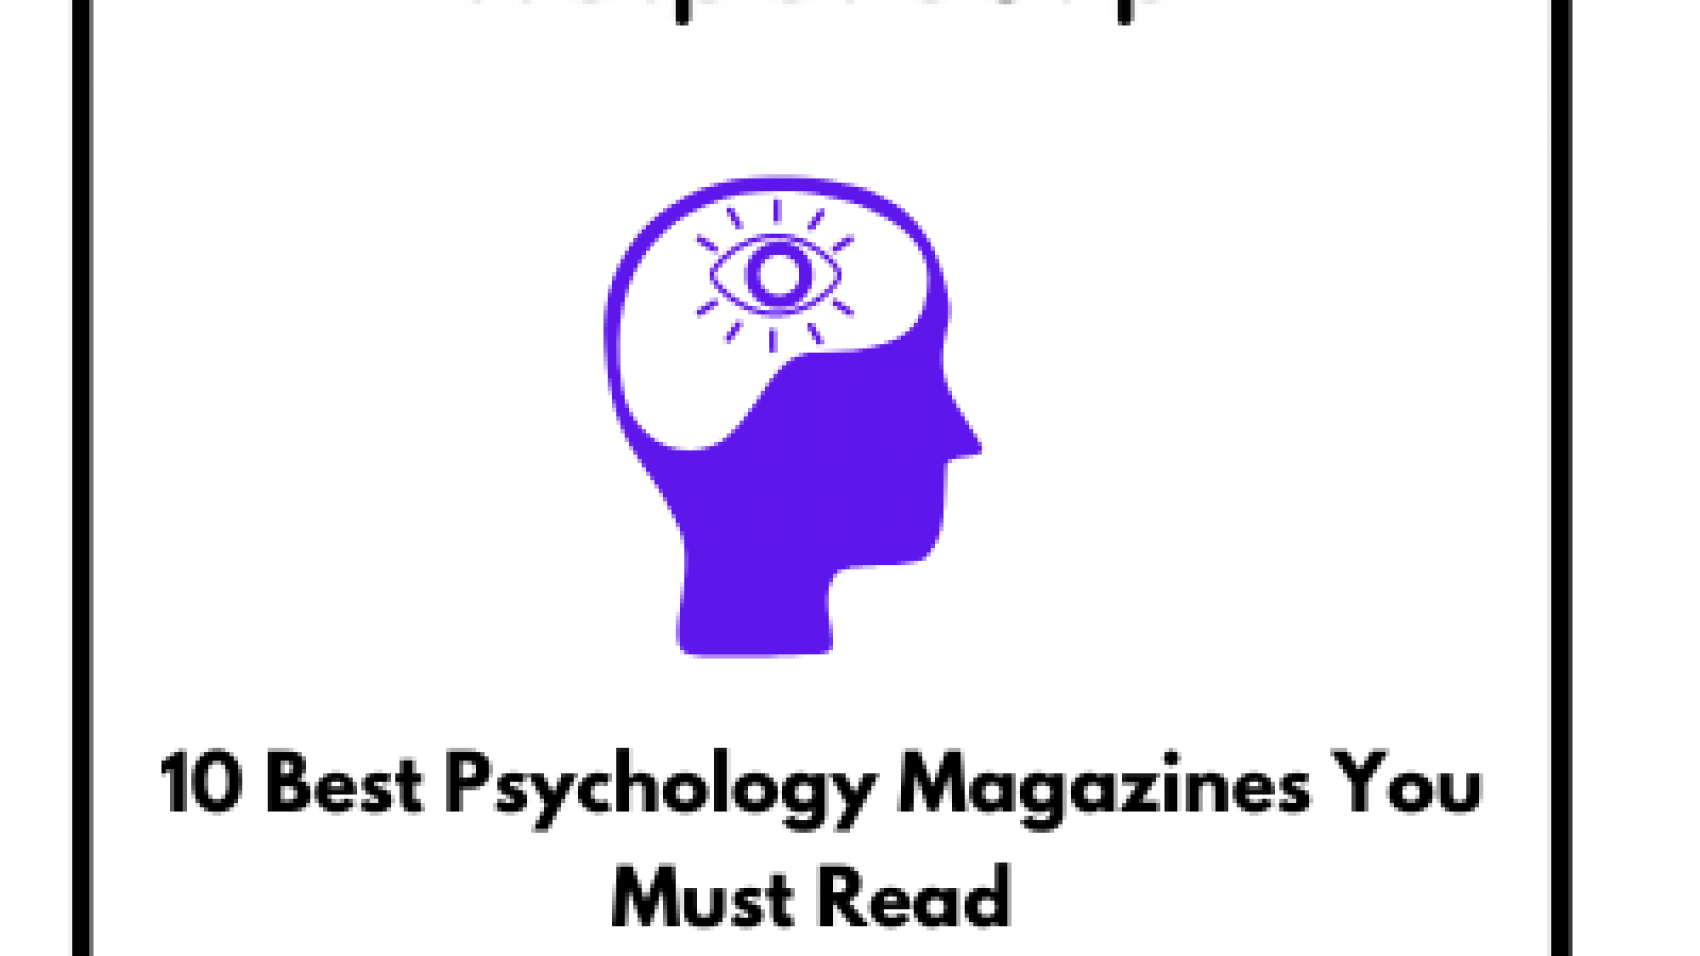 10-Best-Psychology-Magazines-You-Must-Read-2